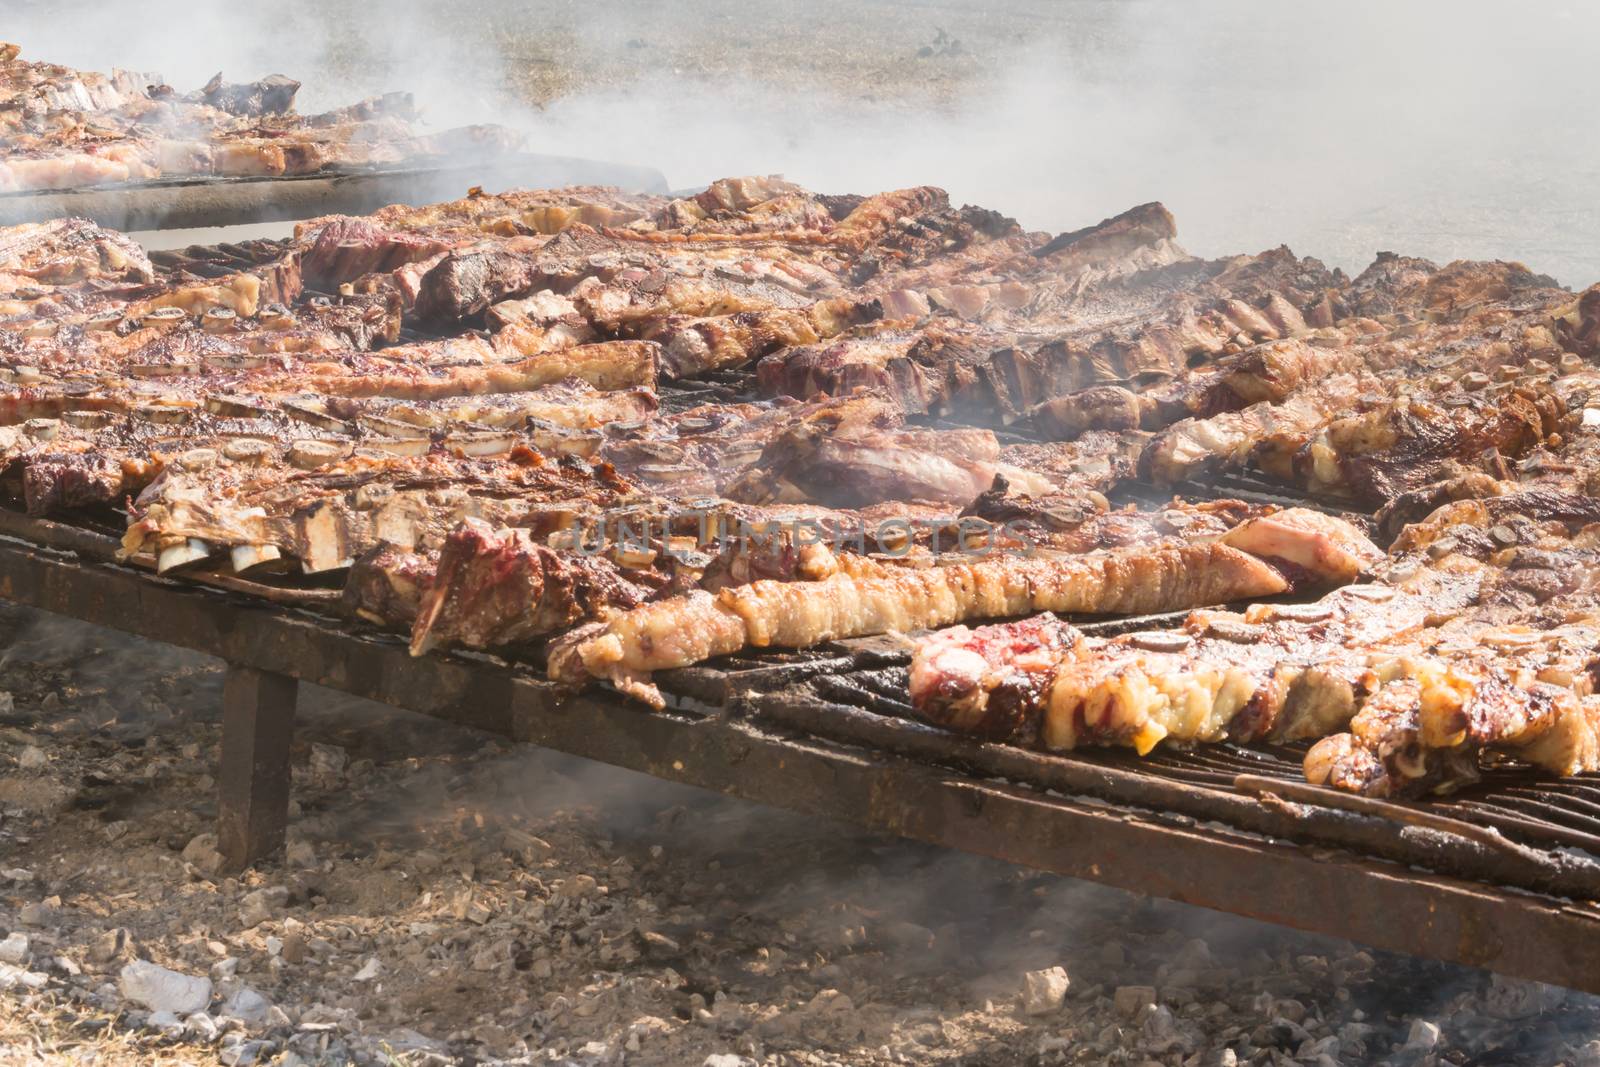 traditional meat grilled on the grill in the Argentine countryside by GabrielaBertolini